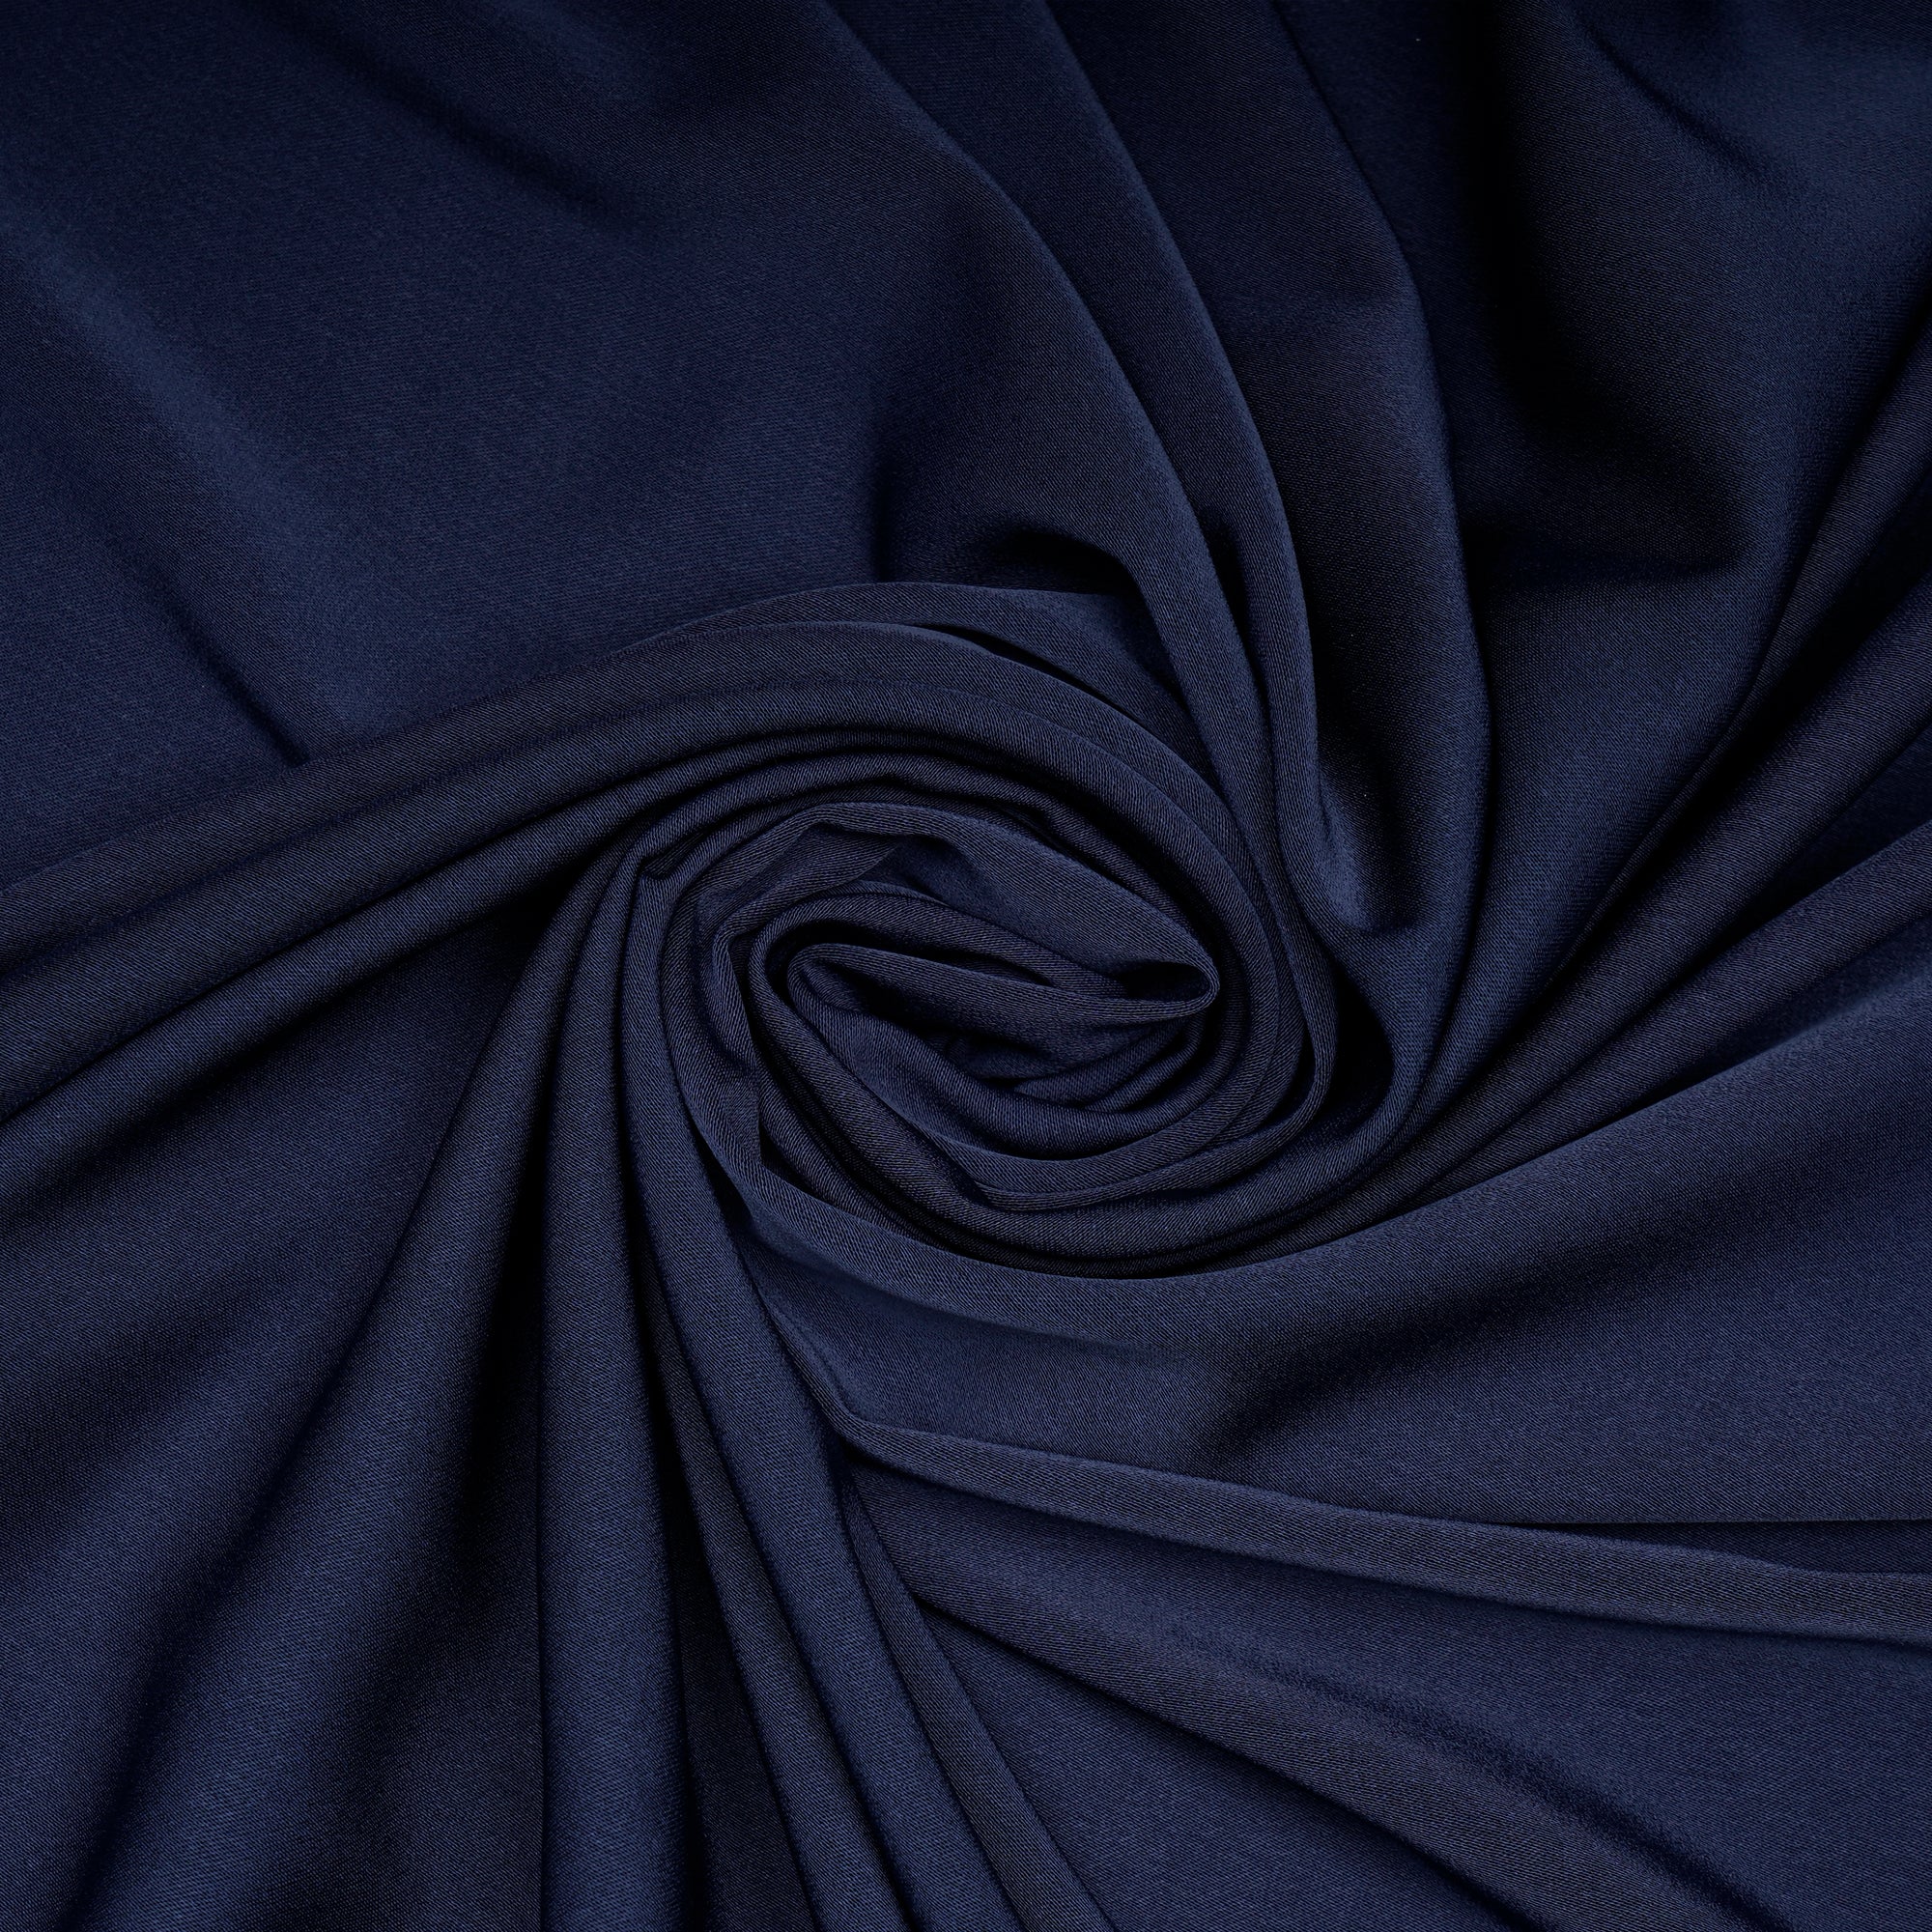 Deep Blue Solid Dyed Imported Prada Crepe Fabric (60" Width)